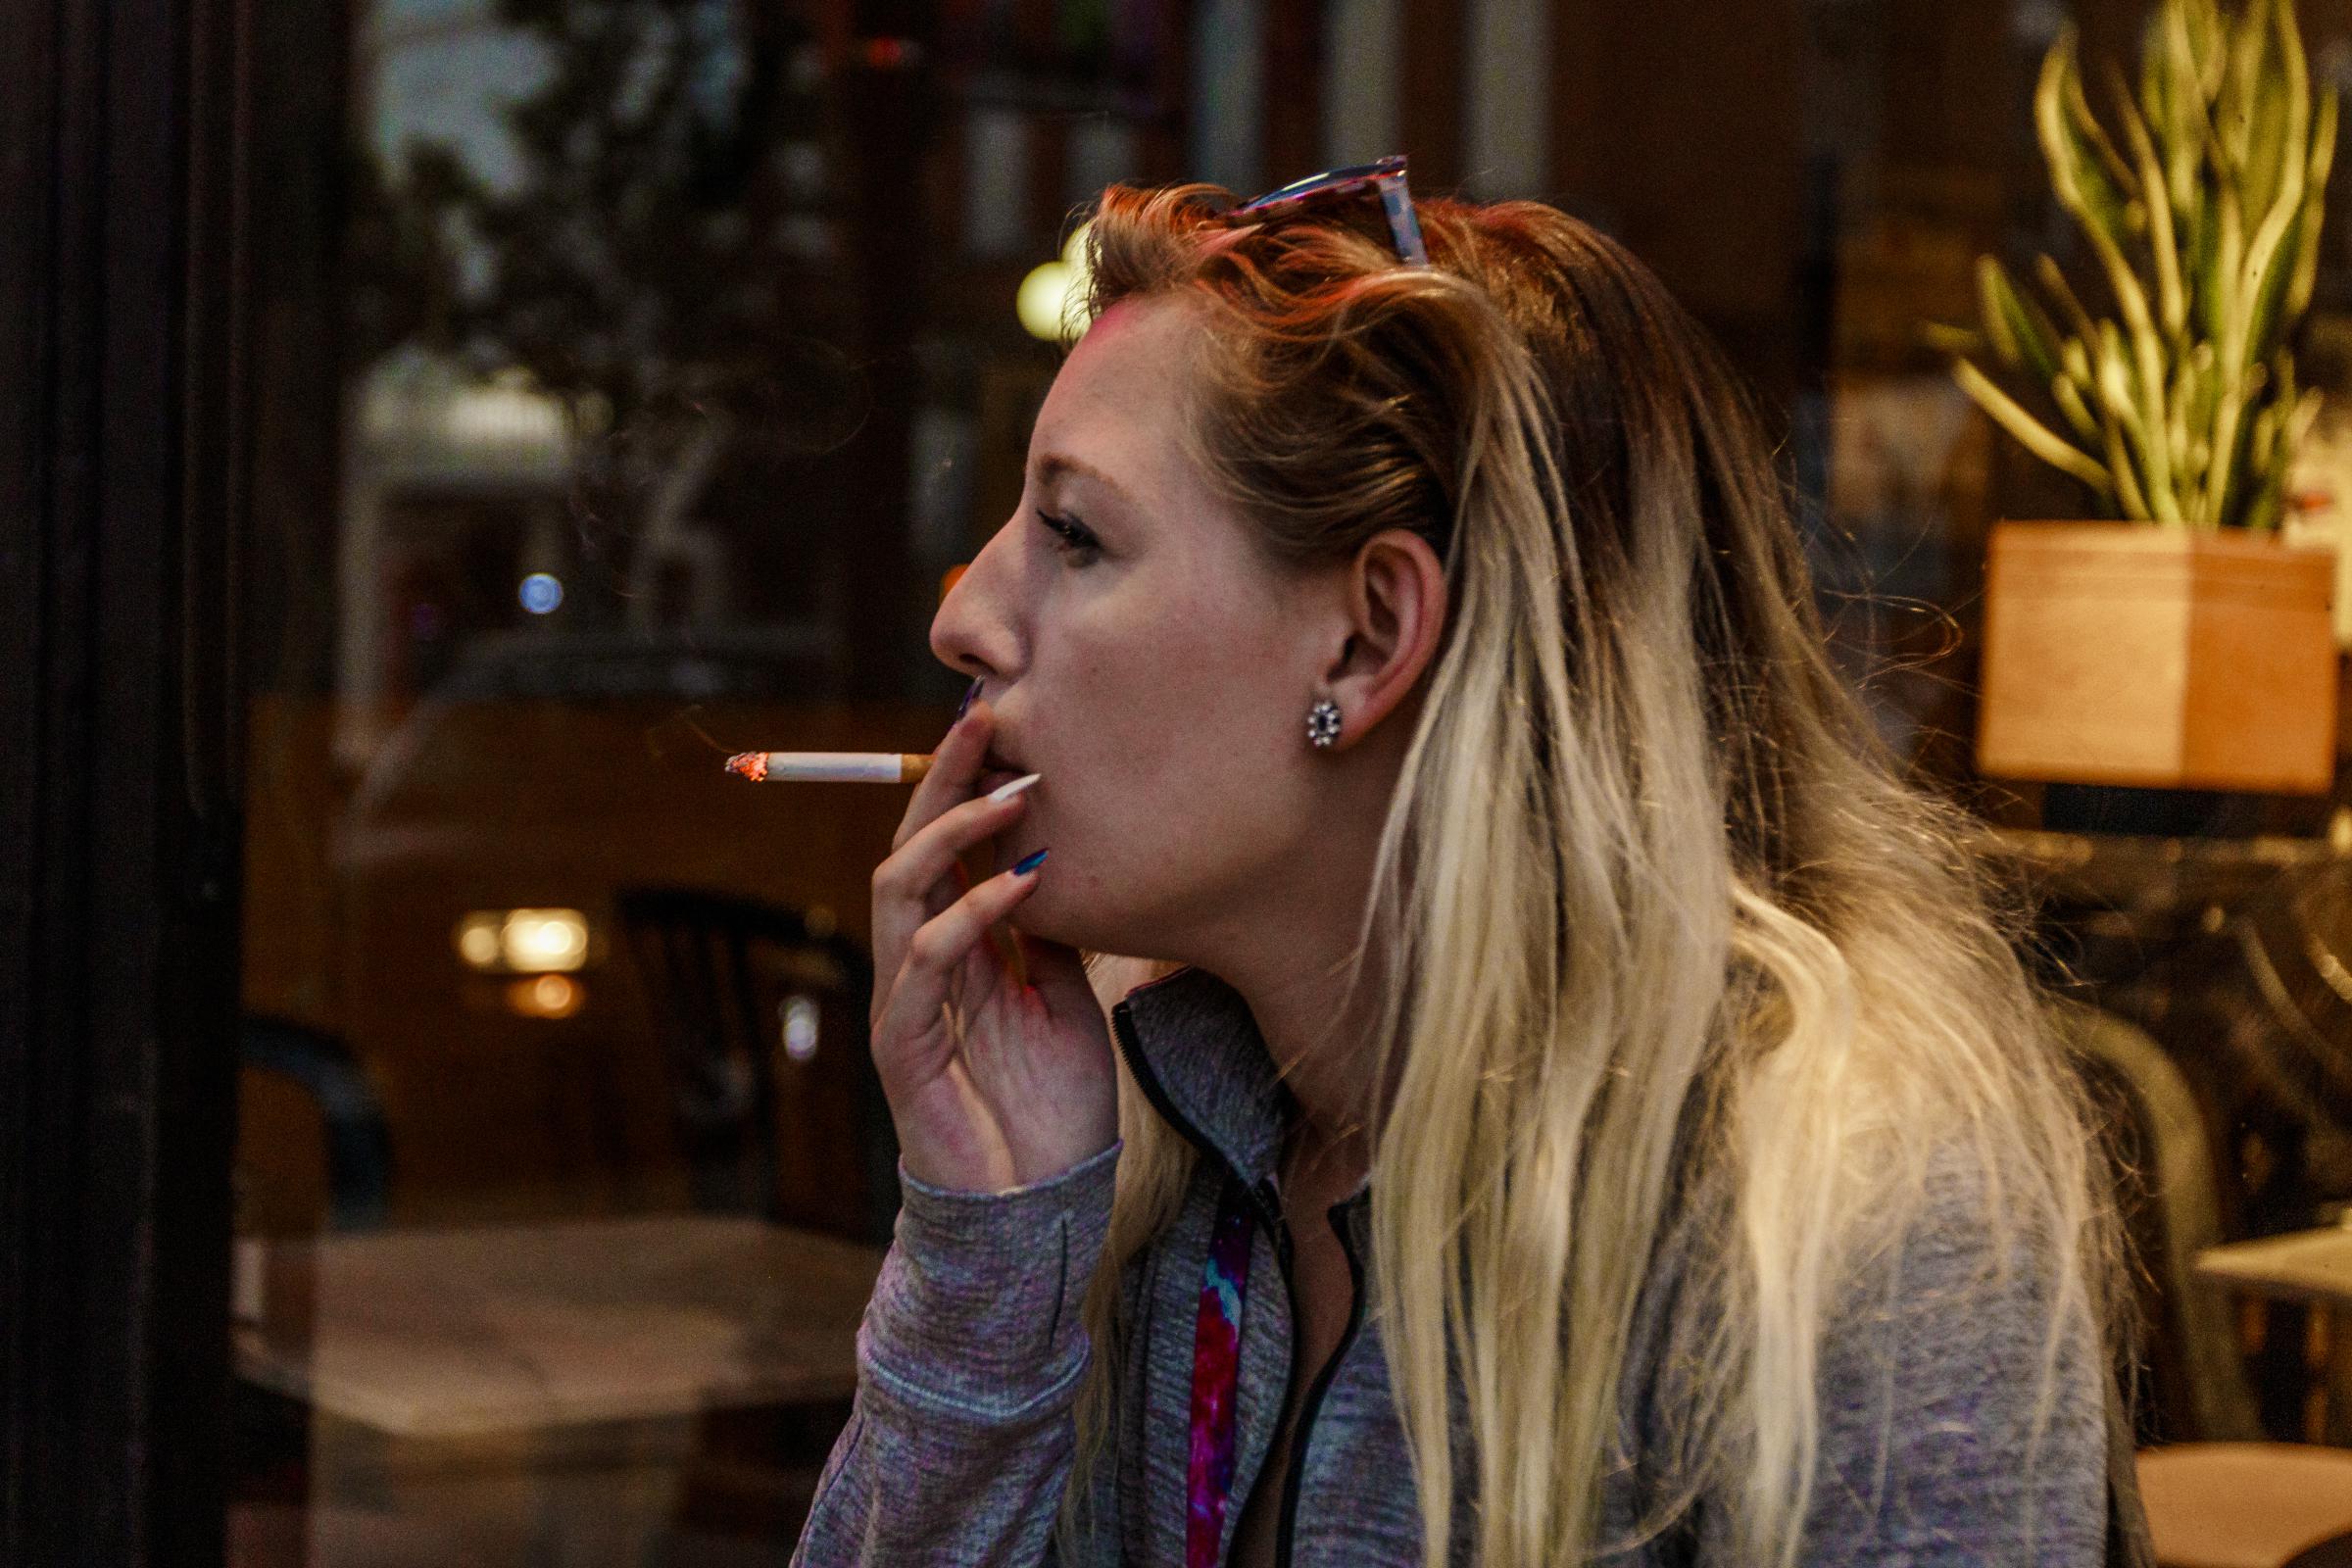 Smoking Ban 10 Years Later More Acceptance But Businesses Still Object Wglt 